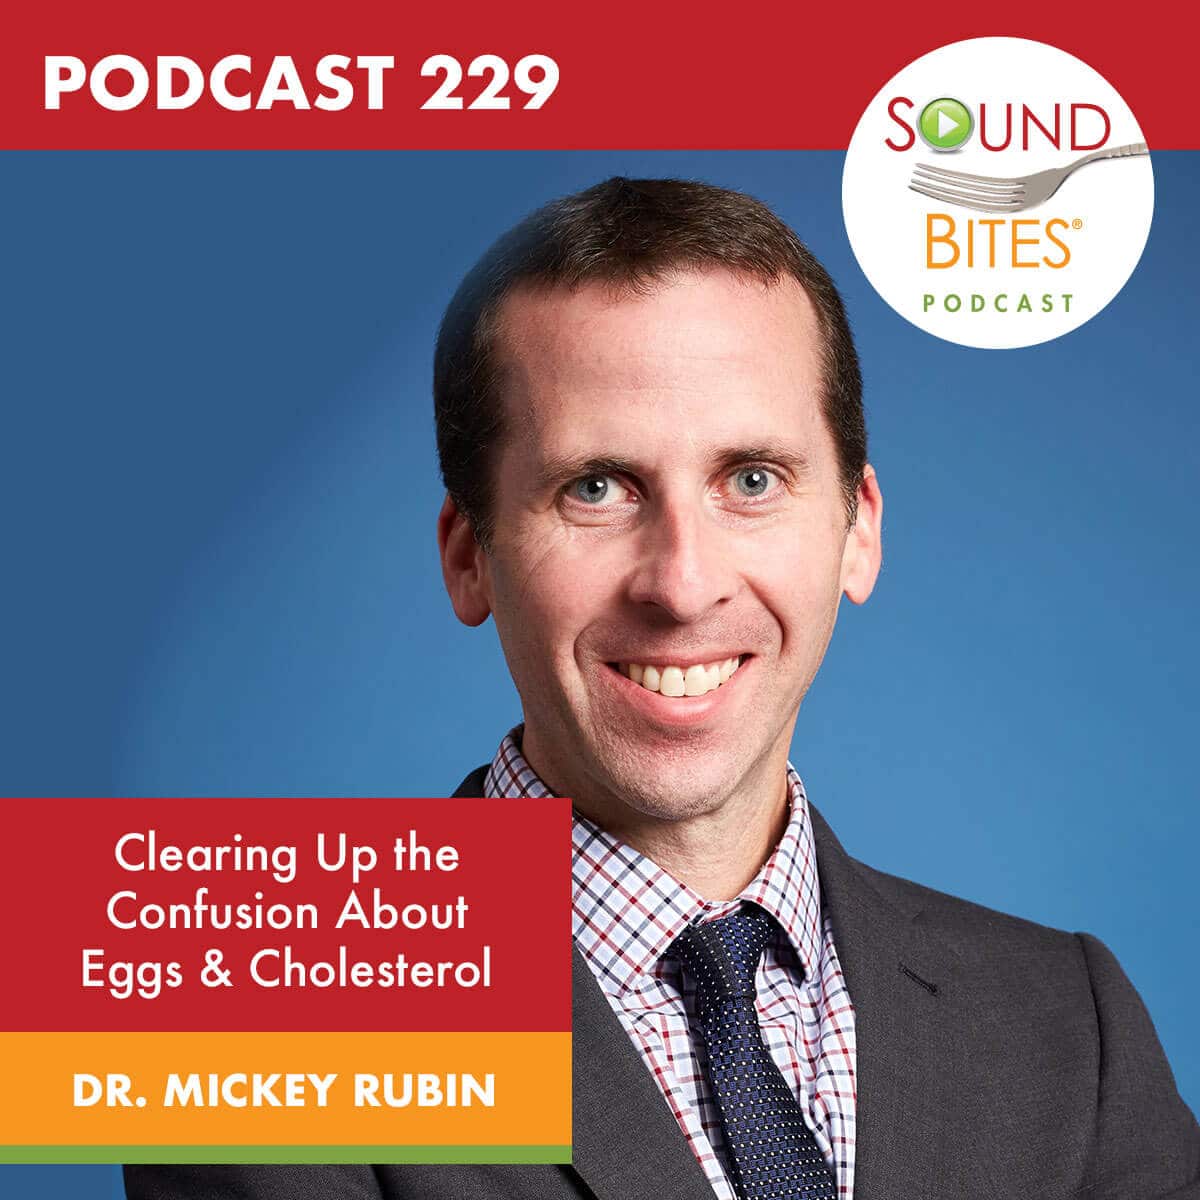 Podcast Episode 229: Current Research & Recommendations: Clearing Up the Confusion About Eggs & Cholesterol – Dr. Mickey Rubin